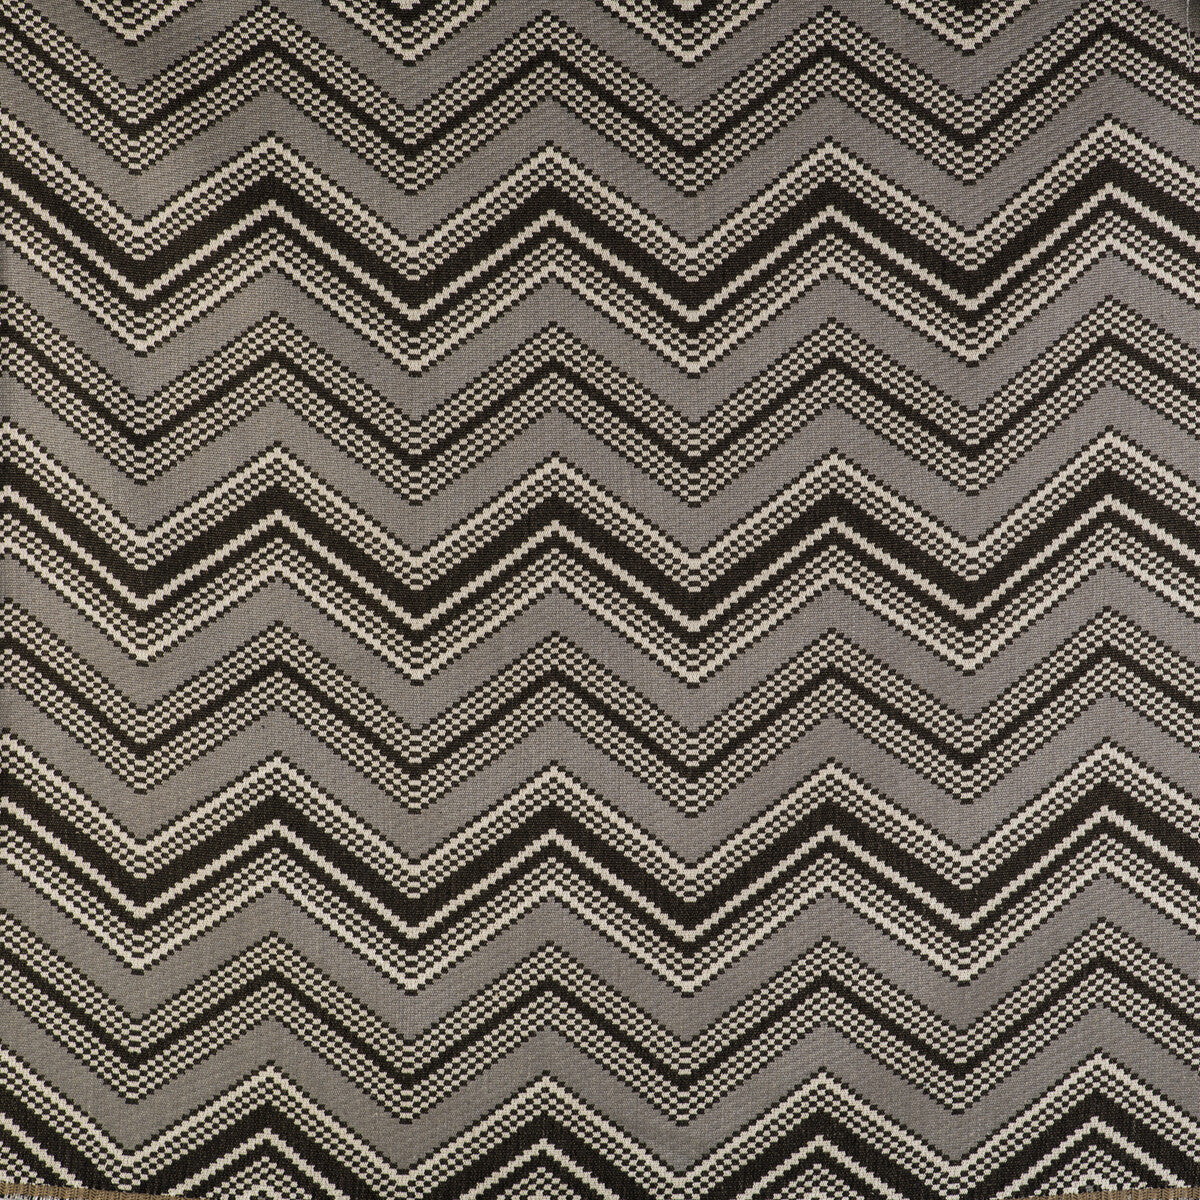 Zig Zag fabric in gris color - pattern GDT5498.004.0 - by Gaston y Daniela in the Gaston Libreria collection